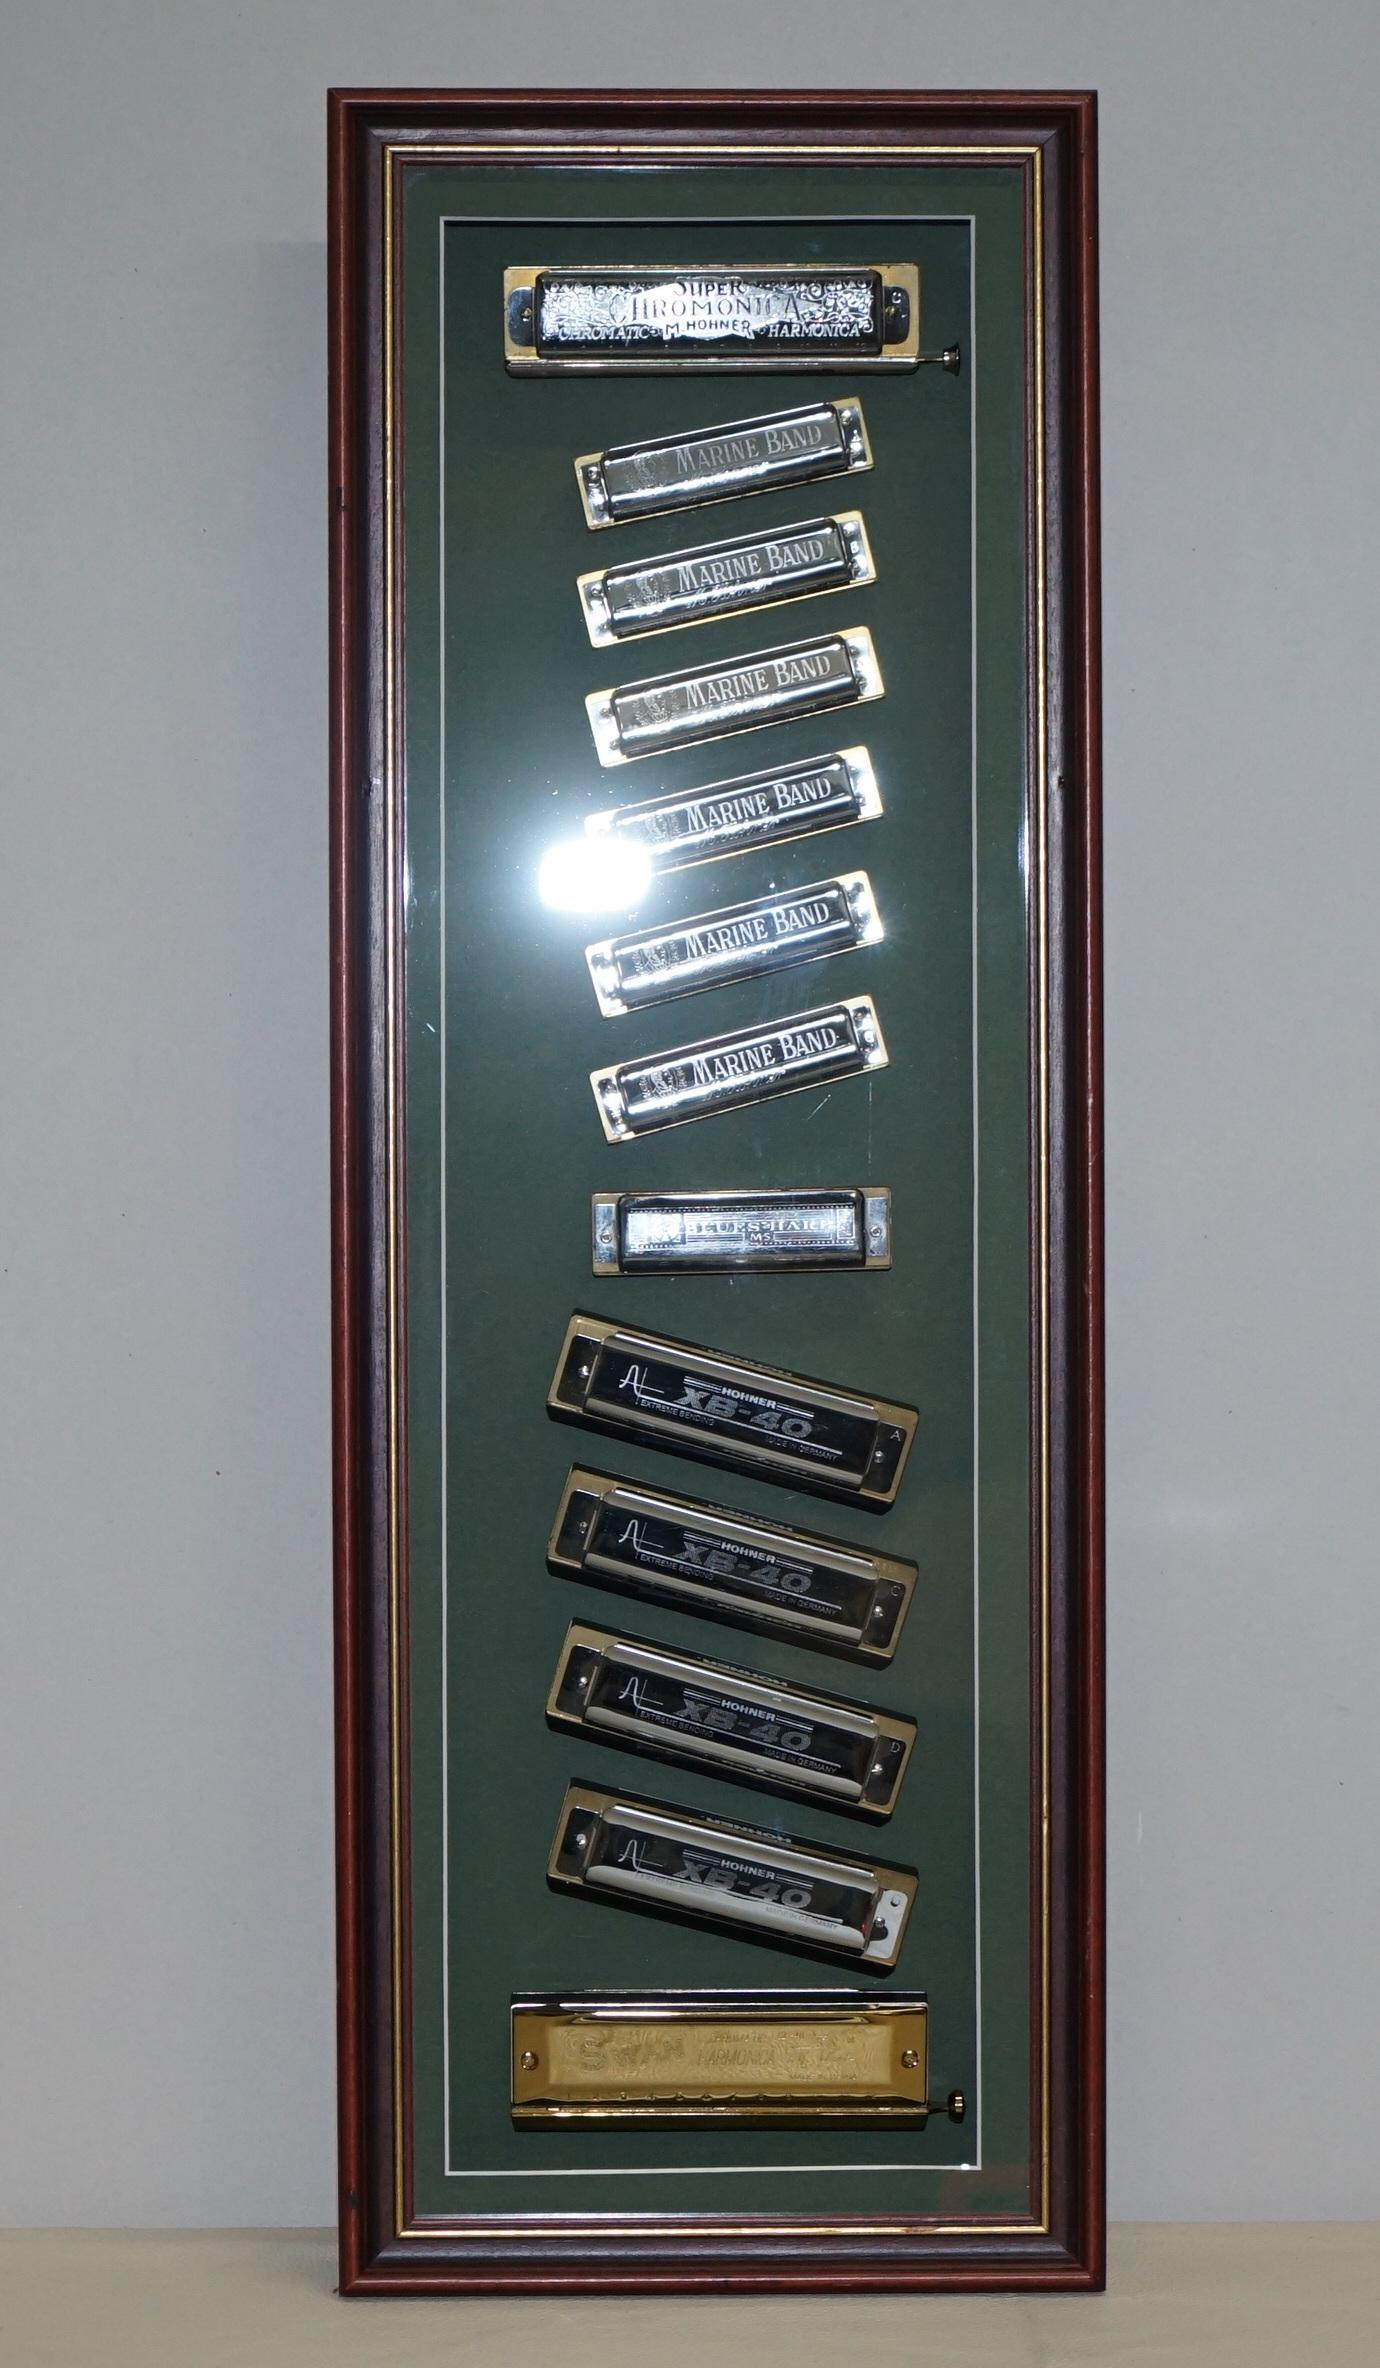 Wimbledon-Furniture

Wimbledon-Furniture is delighted to offer for sale this very cool man cave wall hanging of various luxury harmonicas

A great decorative thing, you have various makers, Hohner, Swan, and Marine band

They all look to be